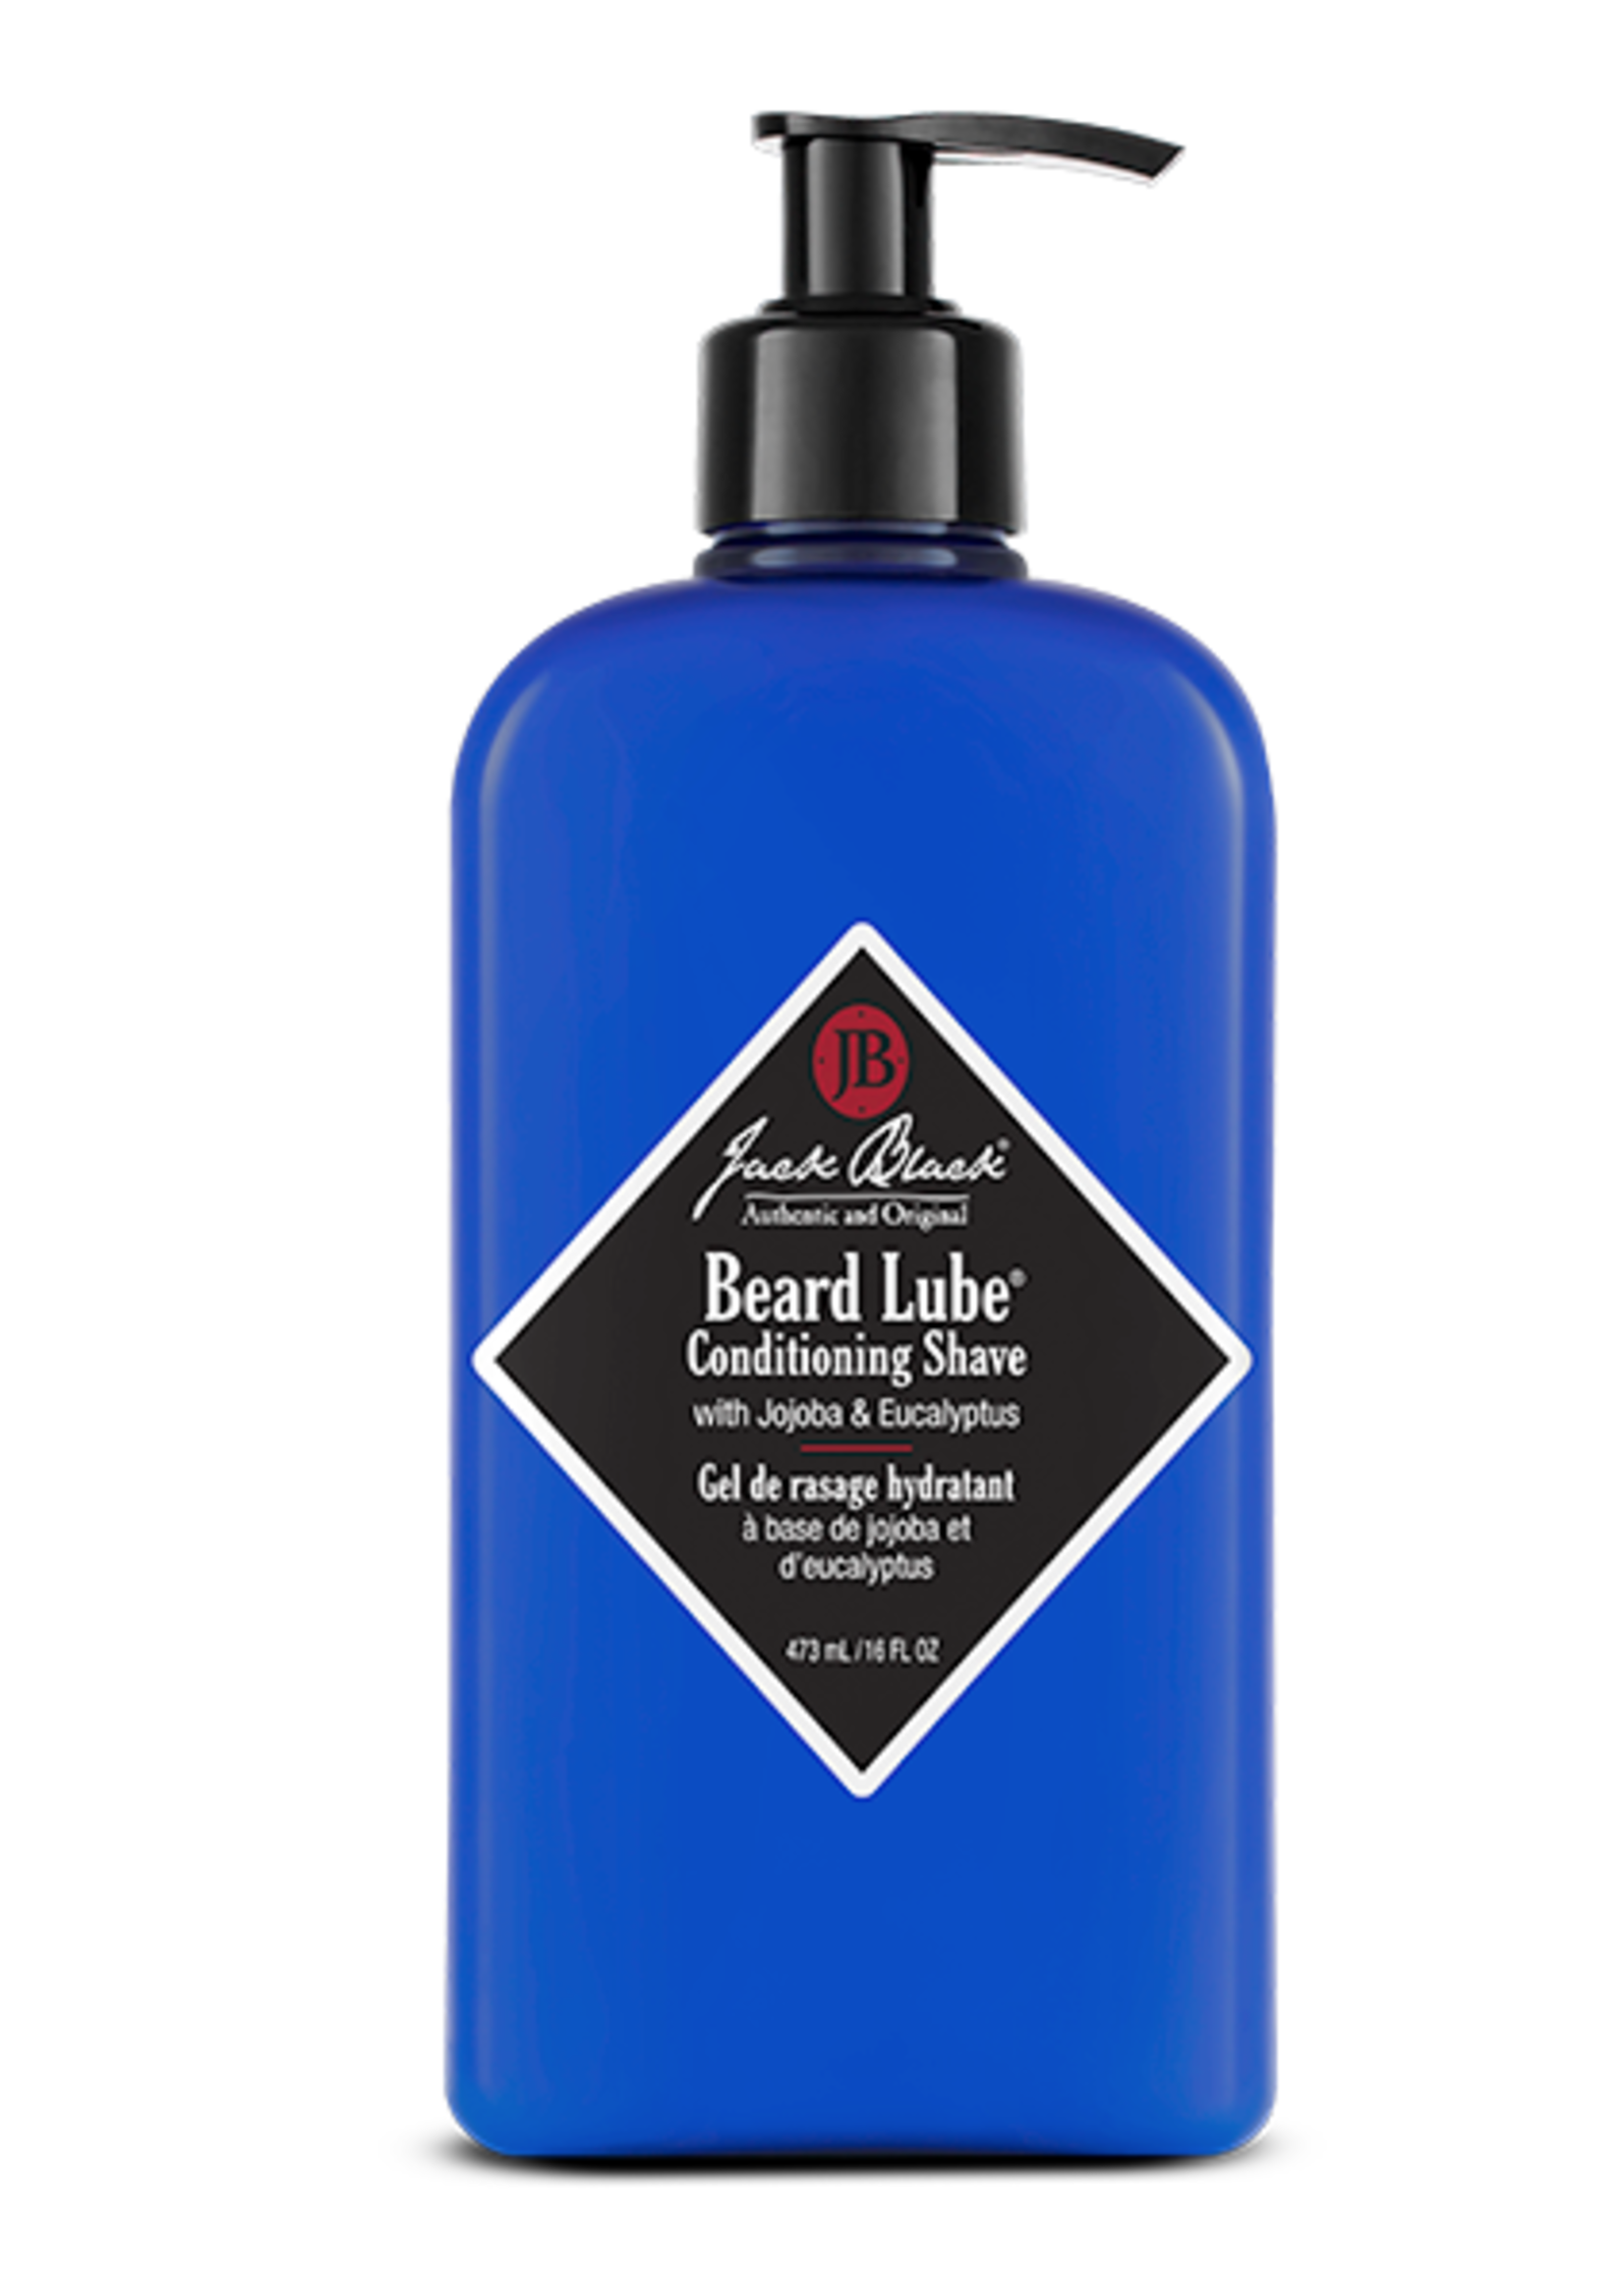 Jack Black beard lube conditioning shave